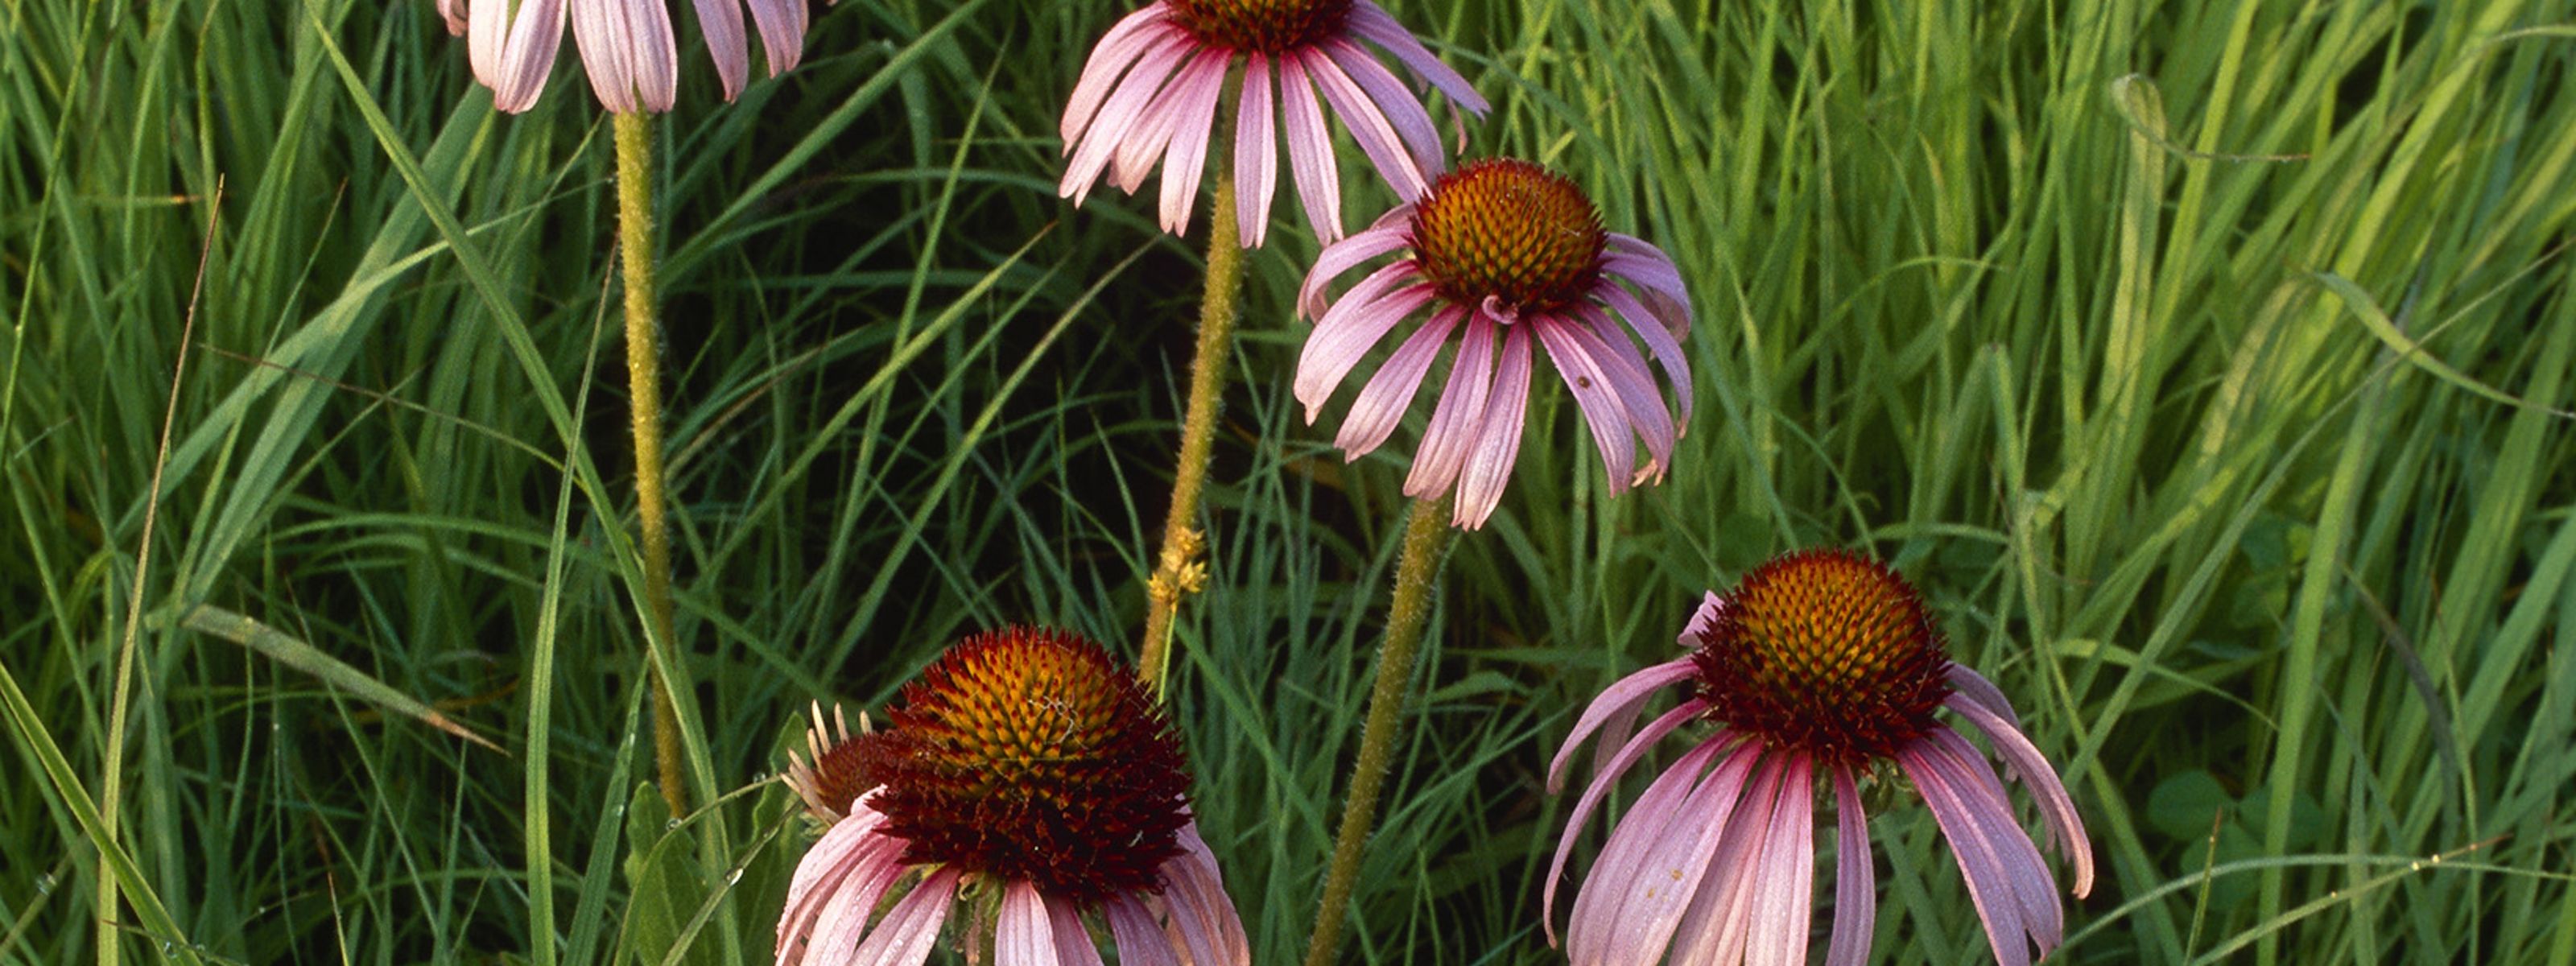 Five purple coneflowers emerge from tall grasses.